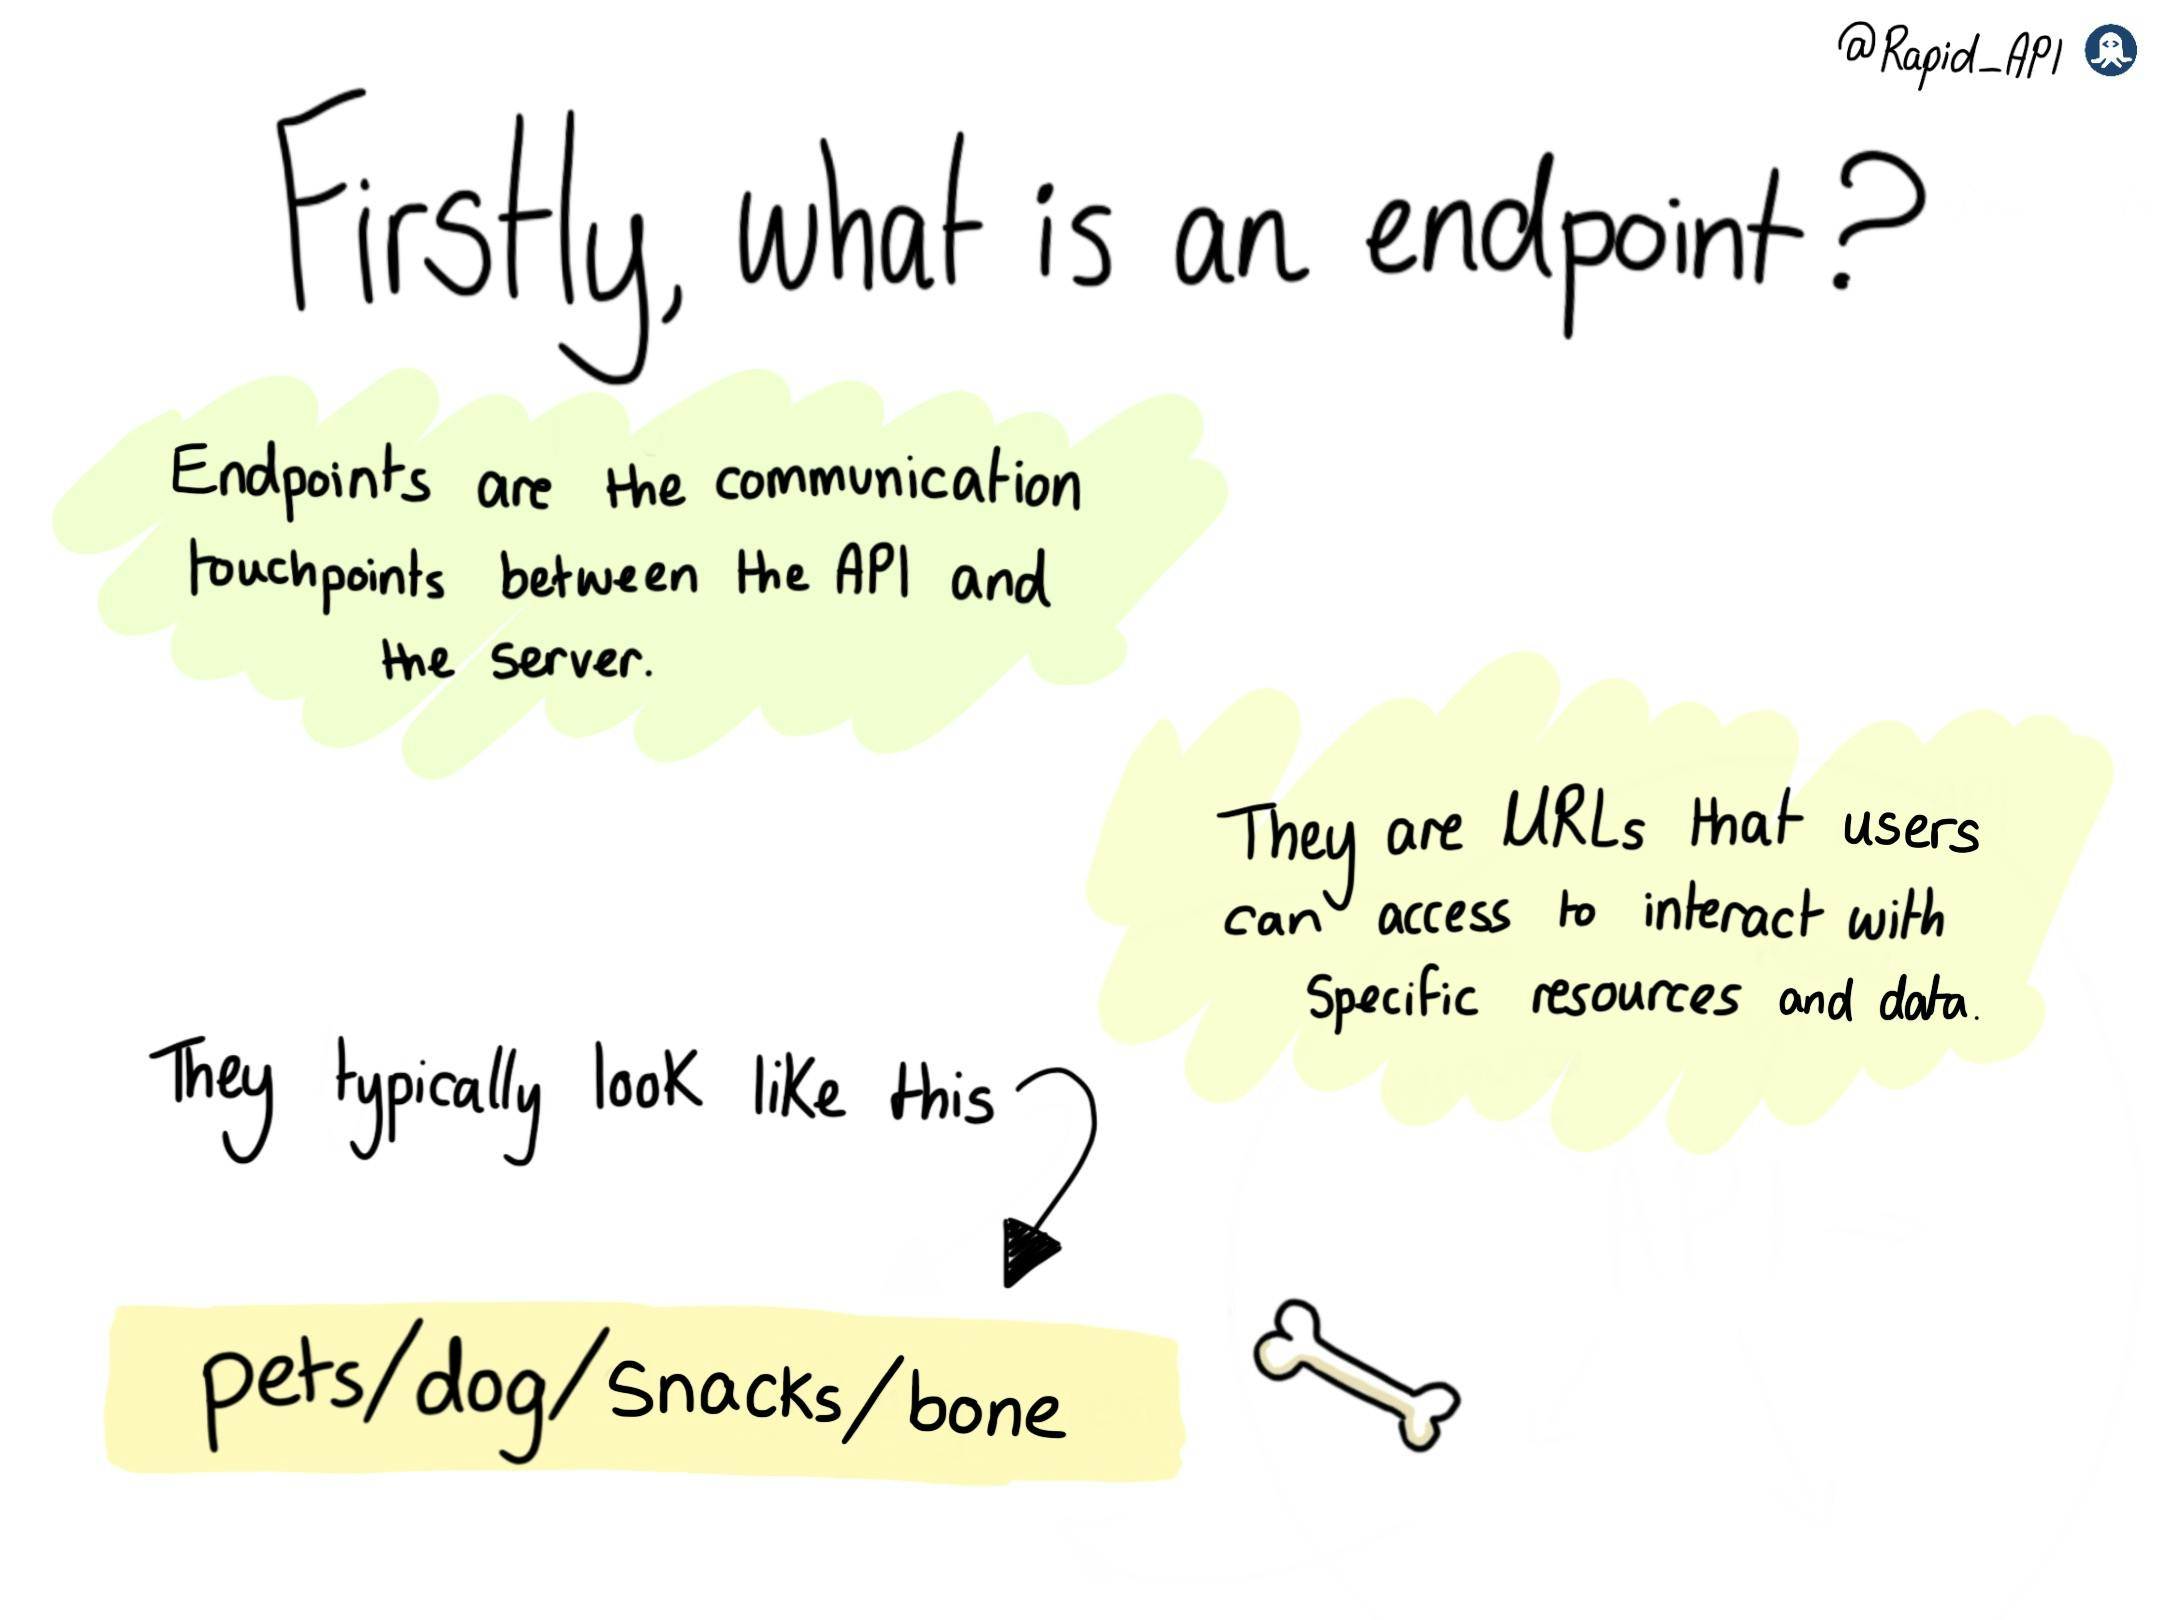 What is an Endpoint?